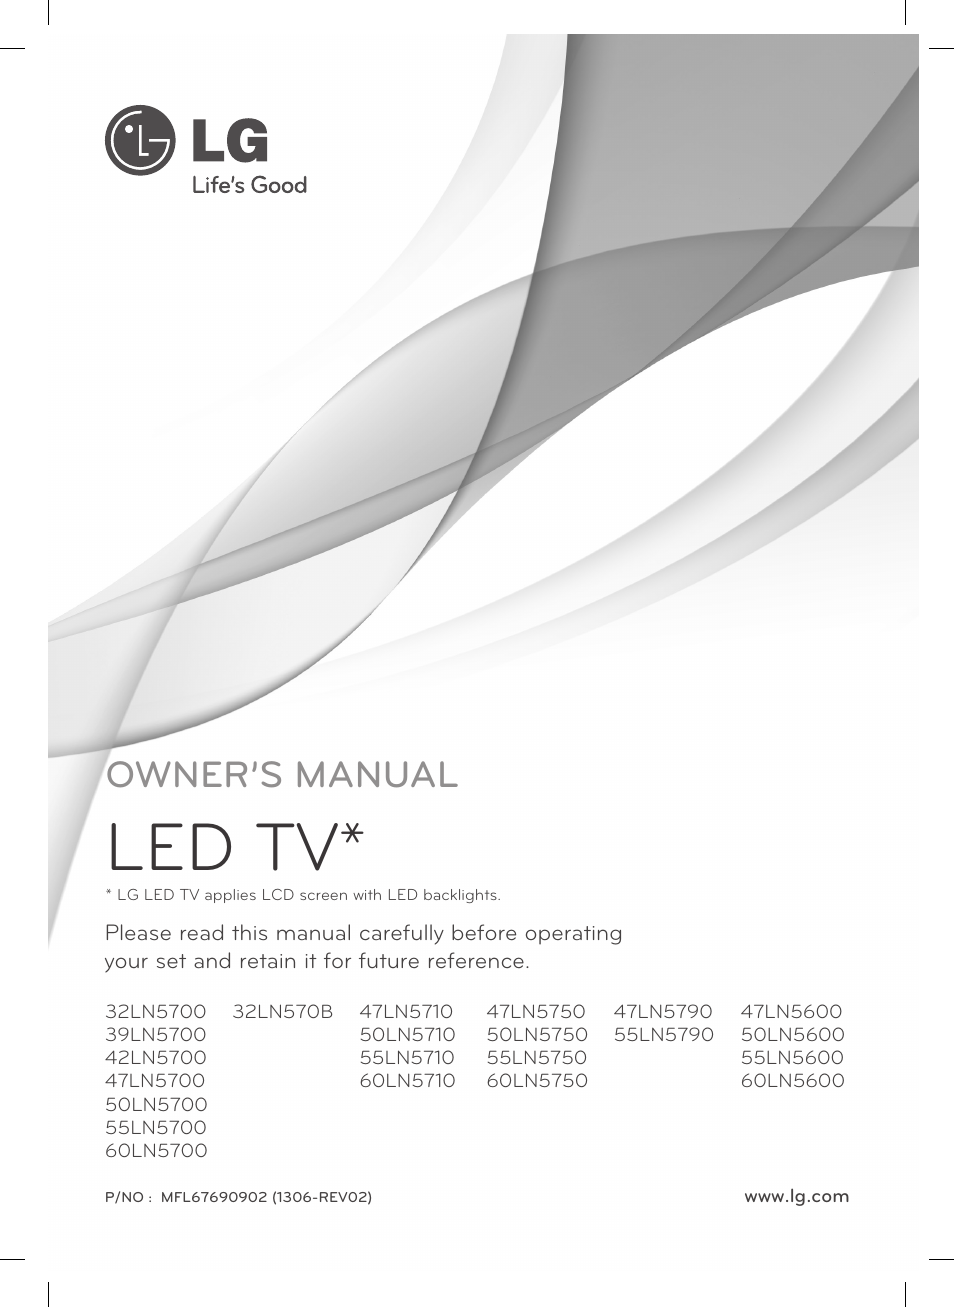 LG 50LN5700 User Manual | 52 pages | Also for: 55LN5600, 60LN5600